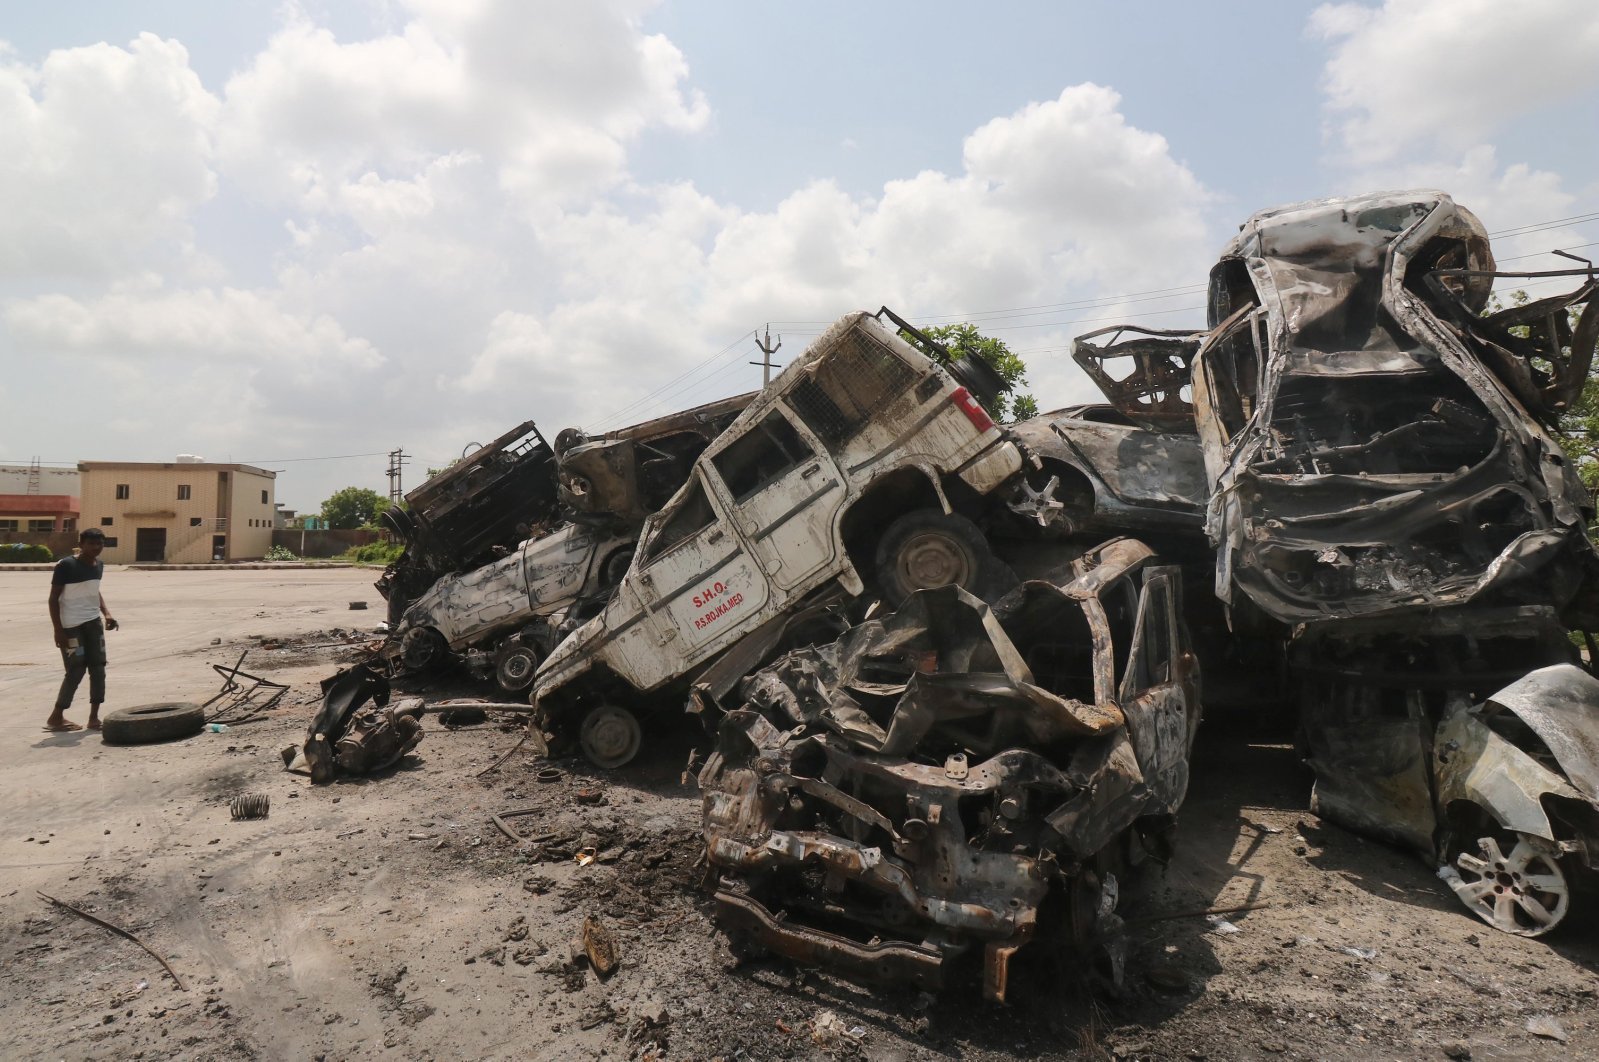 A man stands next to burnt vehicles dumped near a bus stand in the aftermath of riots in Nuh, Haryana state, India, Aug. 1, 2023. (EPA Photo)